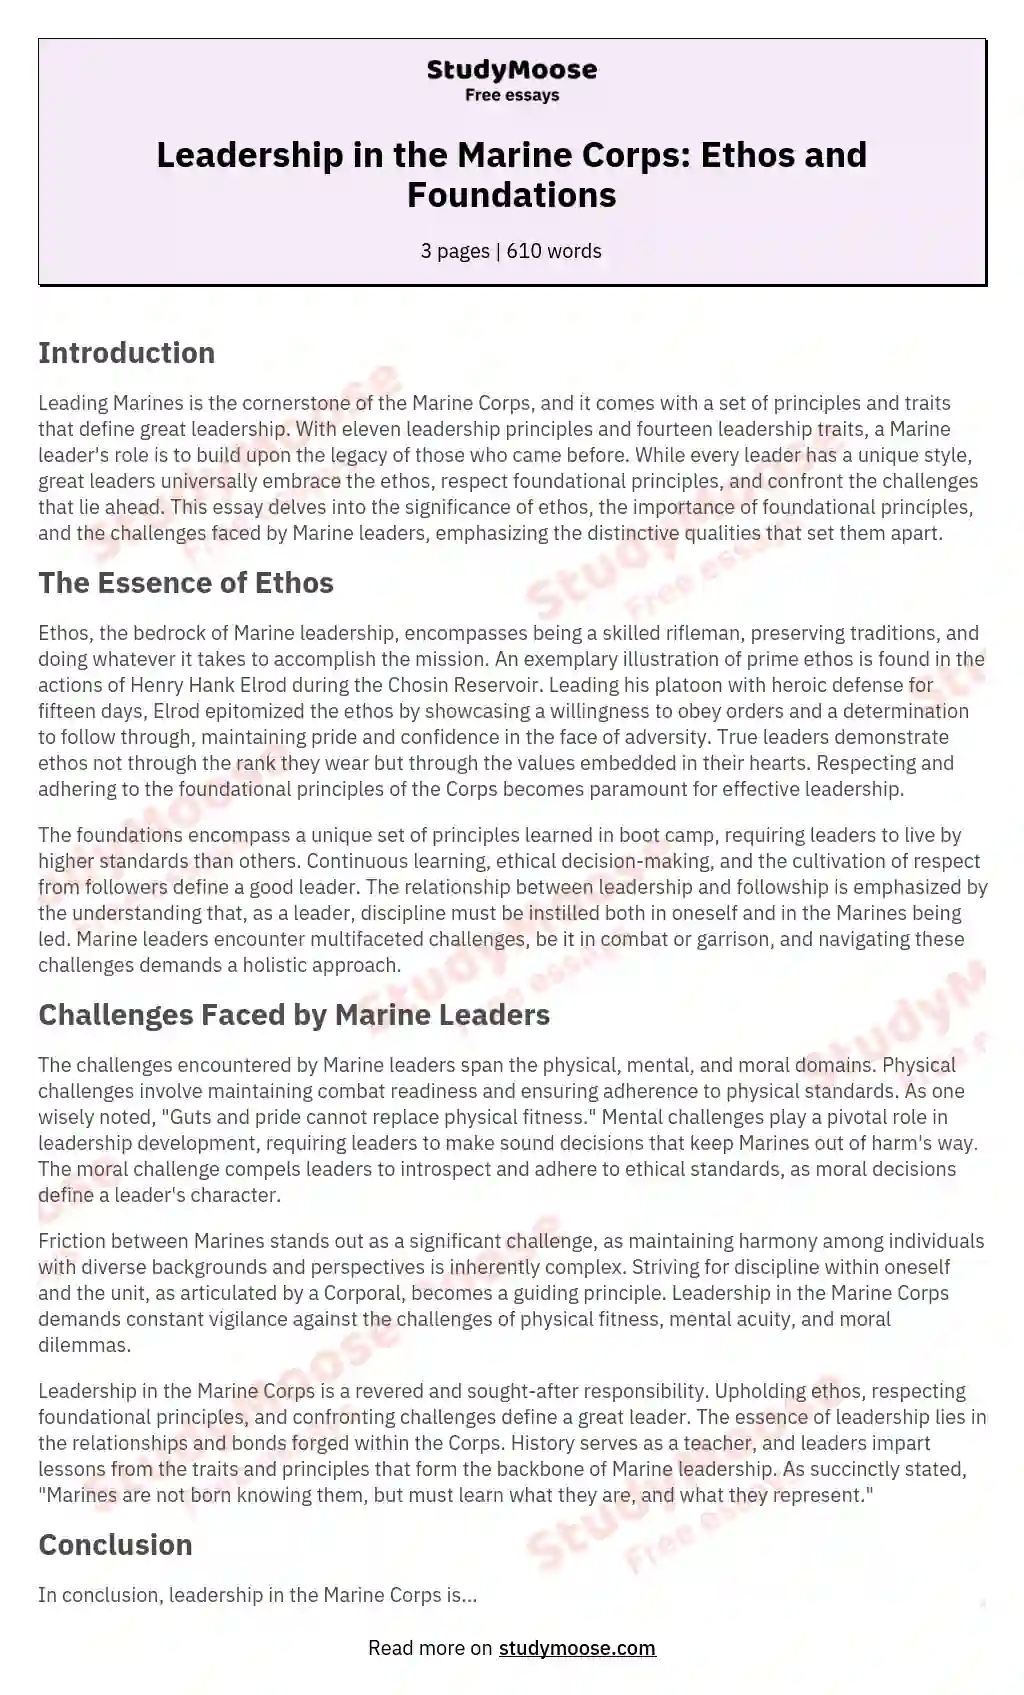 Leadership in the Marine Corps: Ethos and Foundations essay